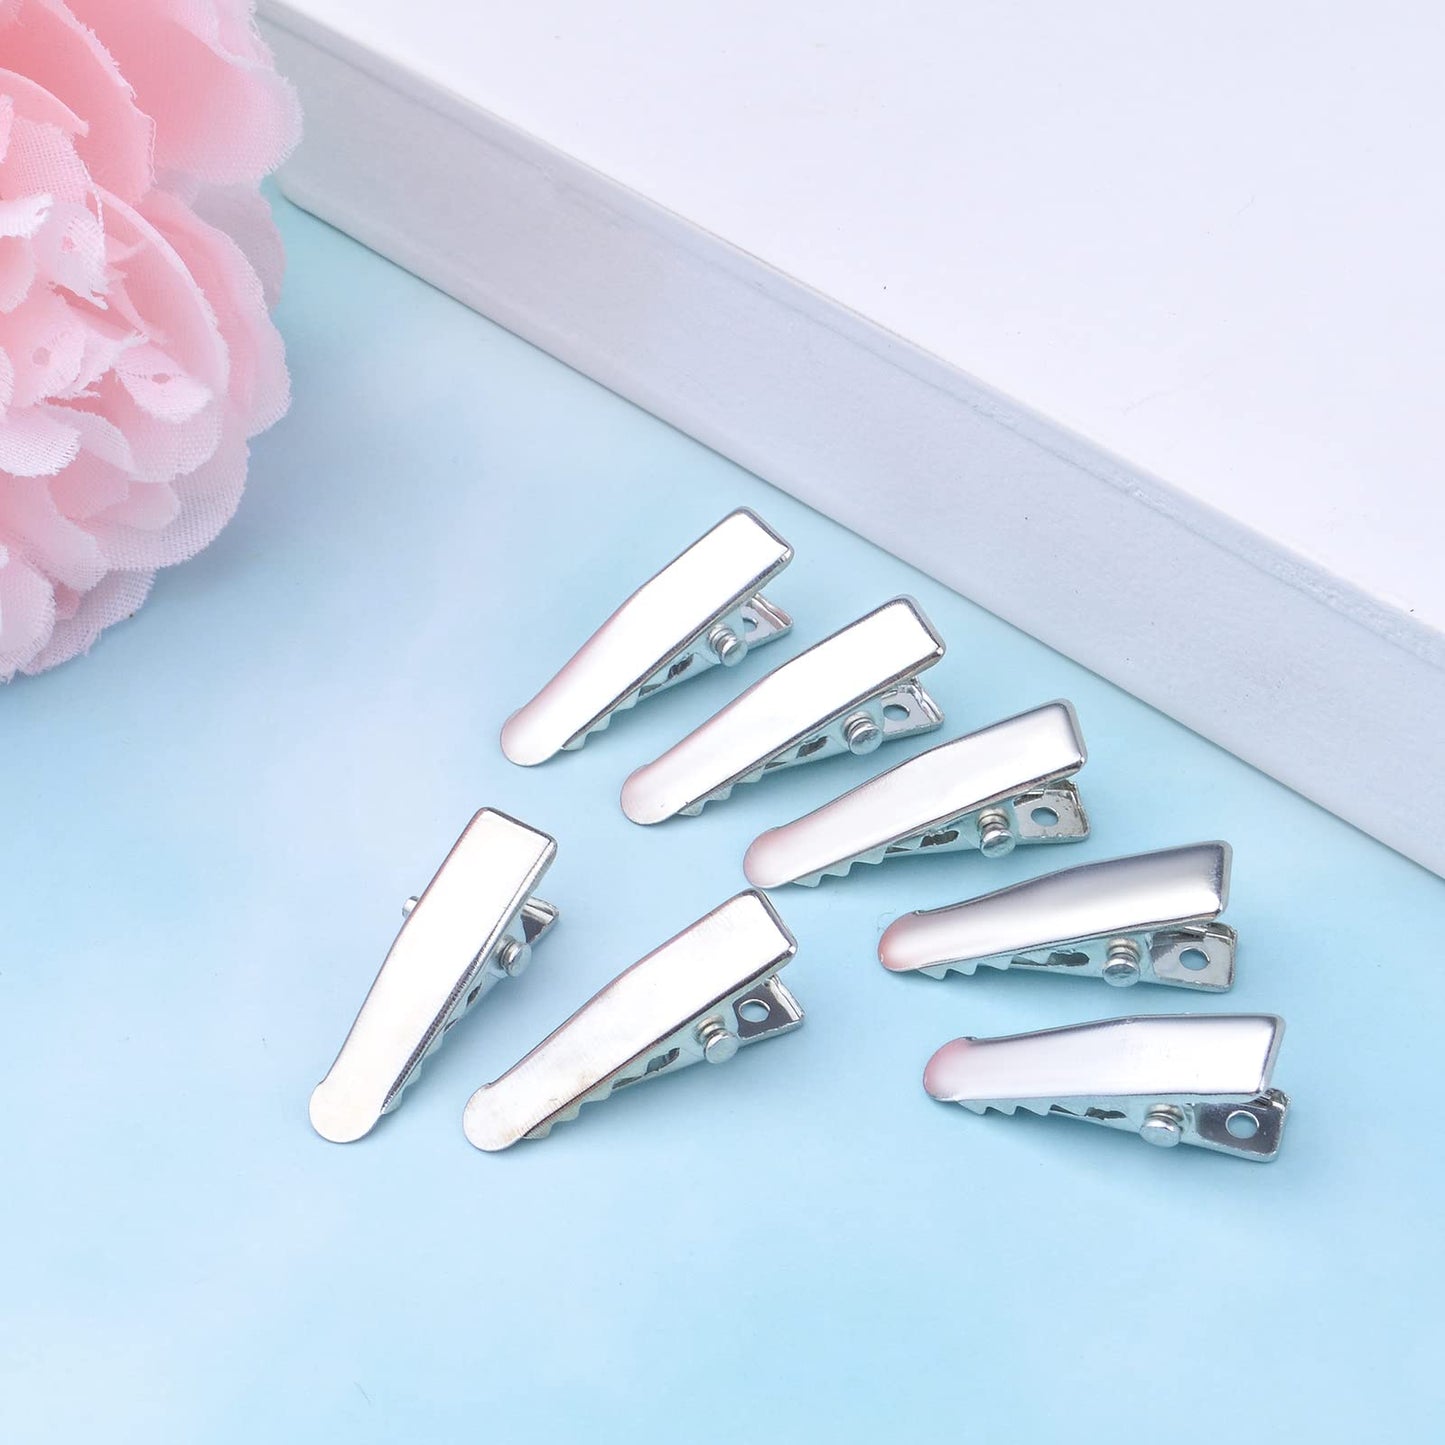 100pcs Alligator Duckbill Hair Clips Metal Single Prong Hair Clip Hairpins Teeth Bows Professional Sectioning Clips DIY Hair Accessories for Women Girls Salon Styling, Silver